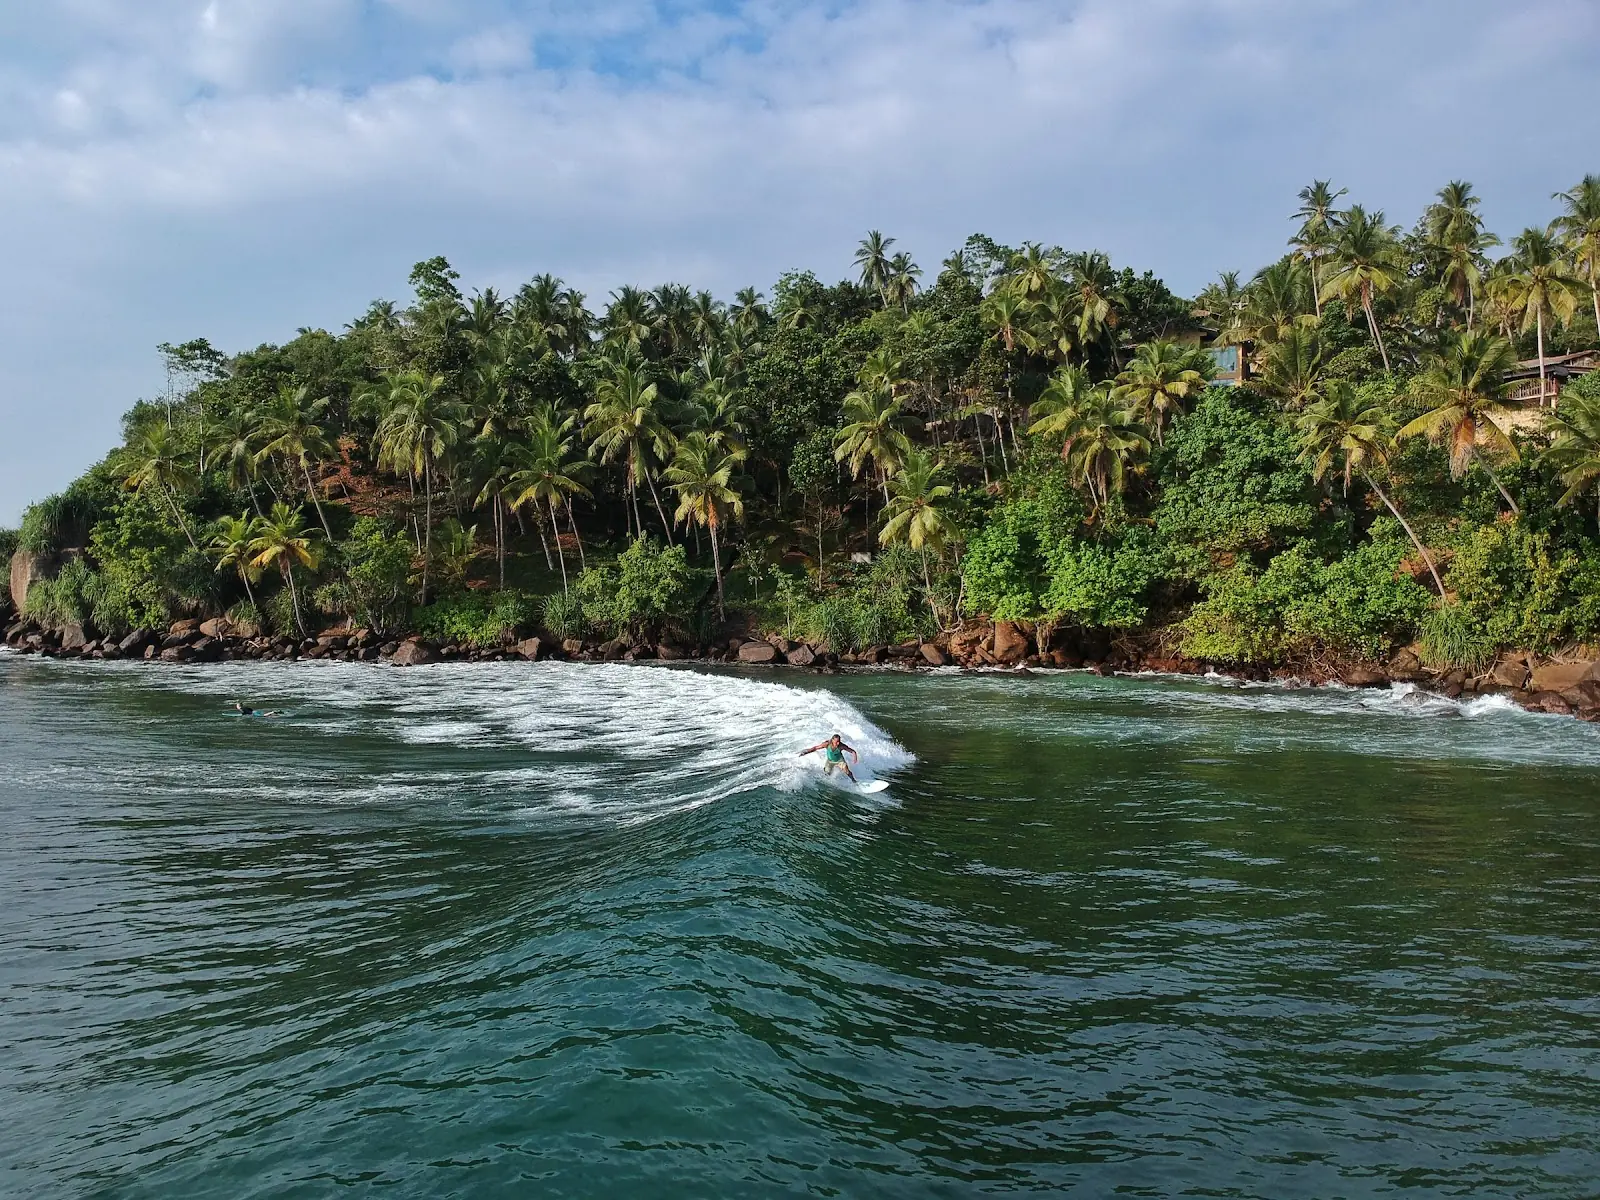 A man surfs in Sri Lanka over looking the jungle.